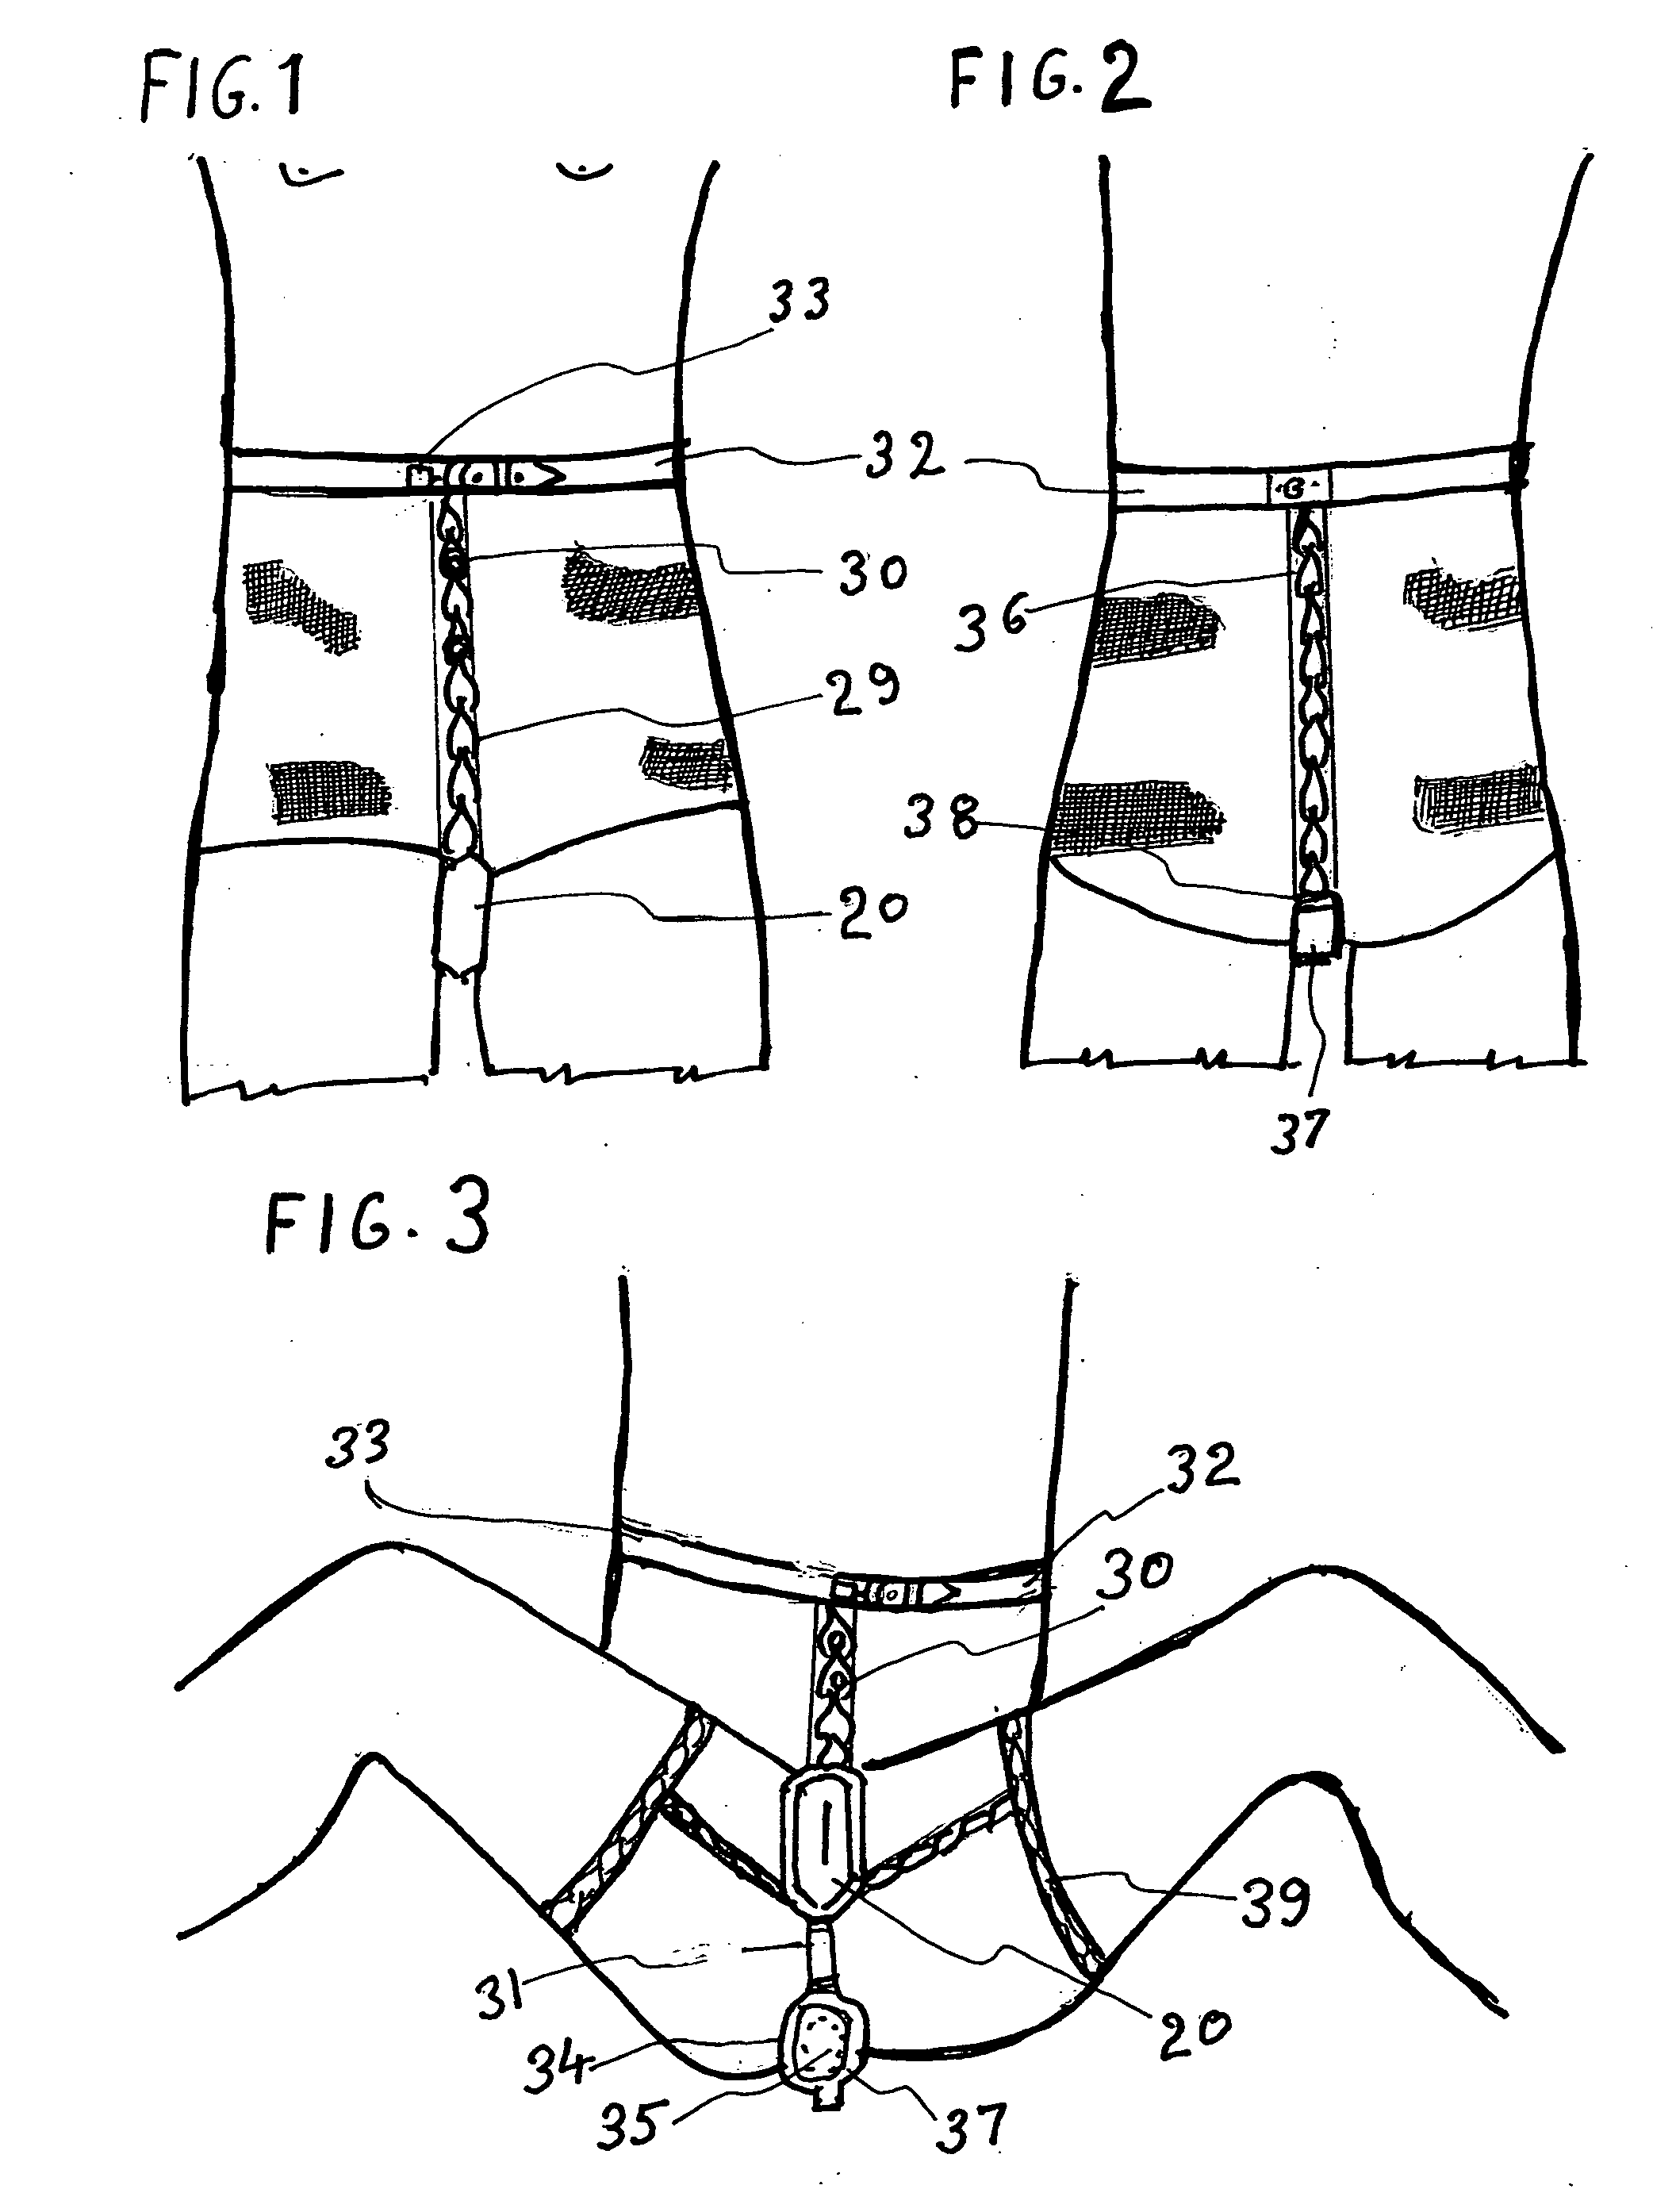 Security underwear device for sexual organs